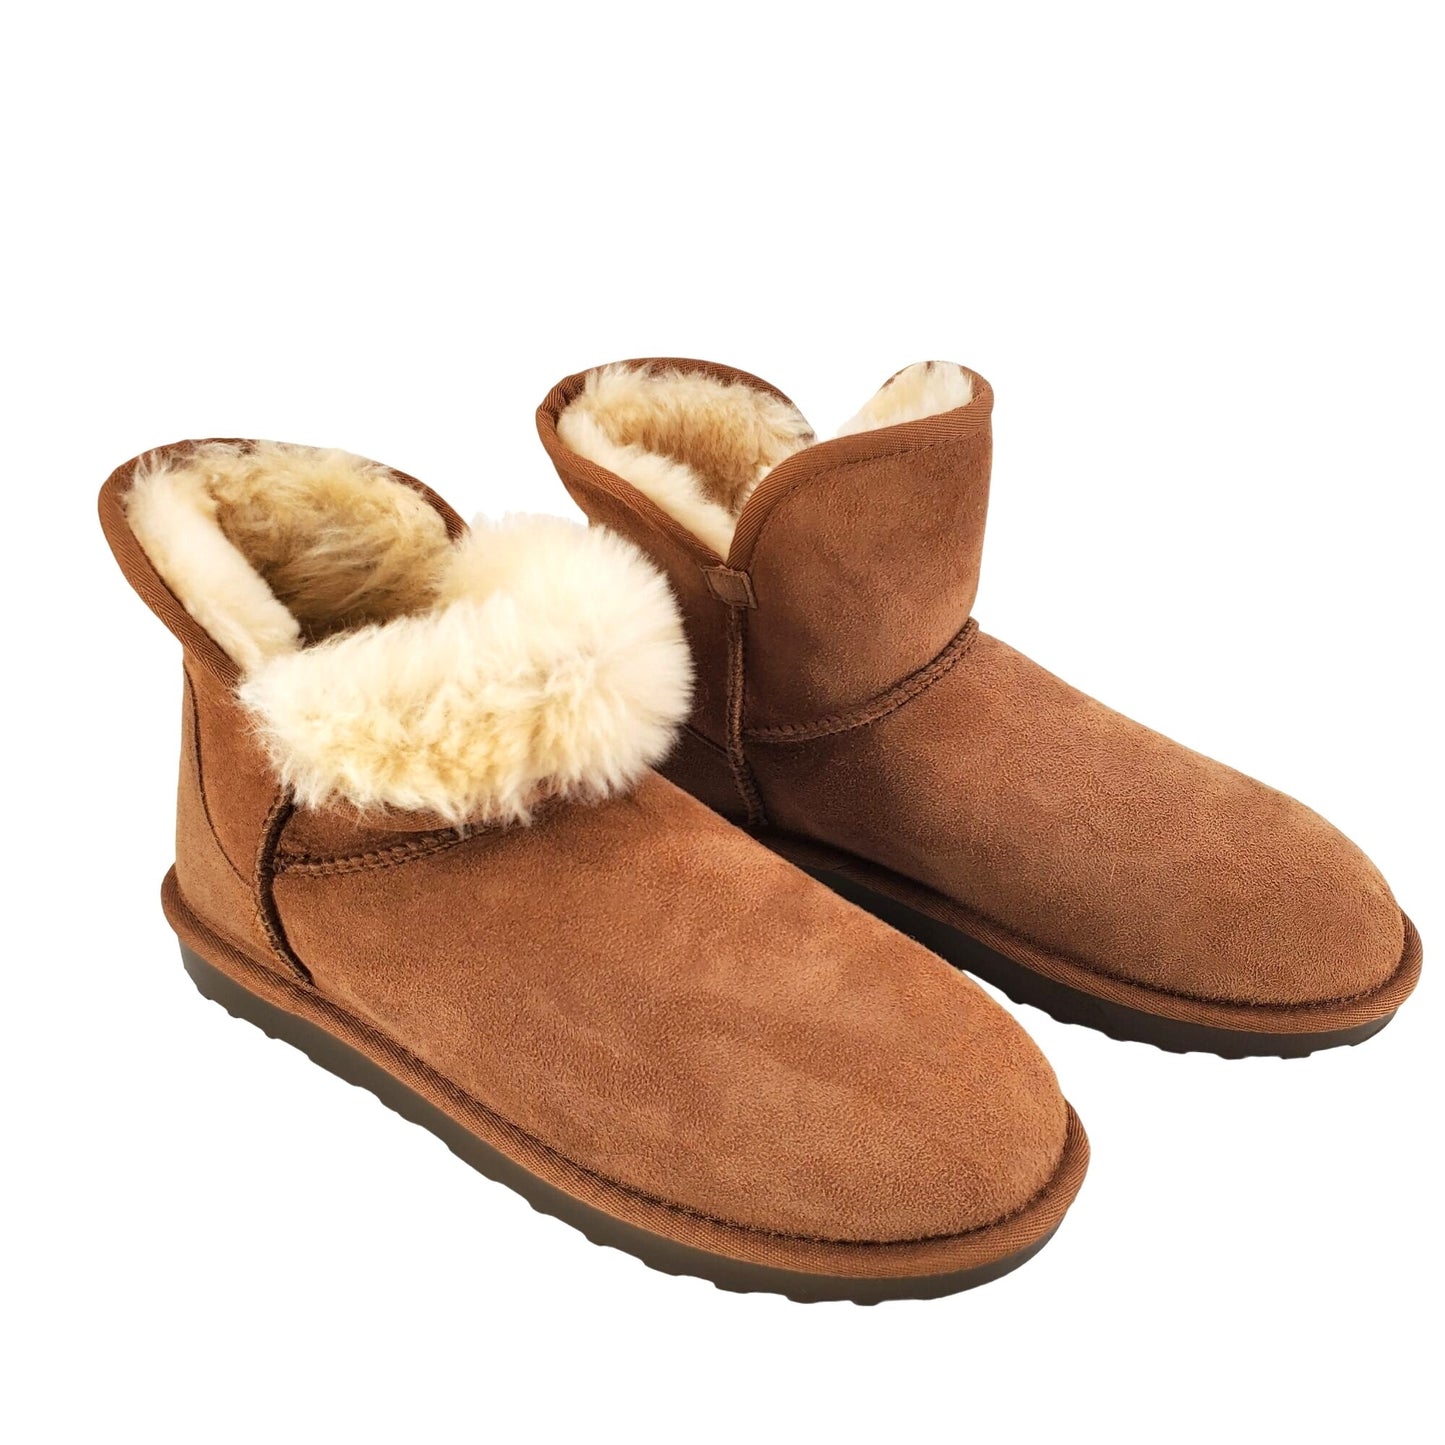 Kirkland Signature Real Fur Boot Womens SHEARLING Sheepskin Suede Scalloped Fold Over shoes